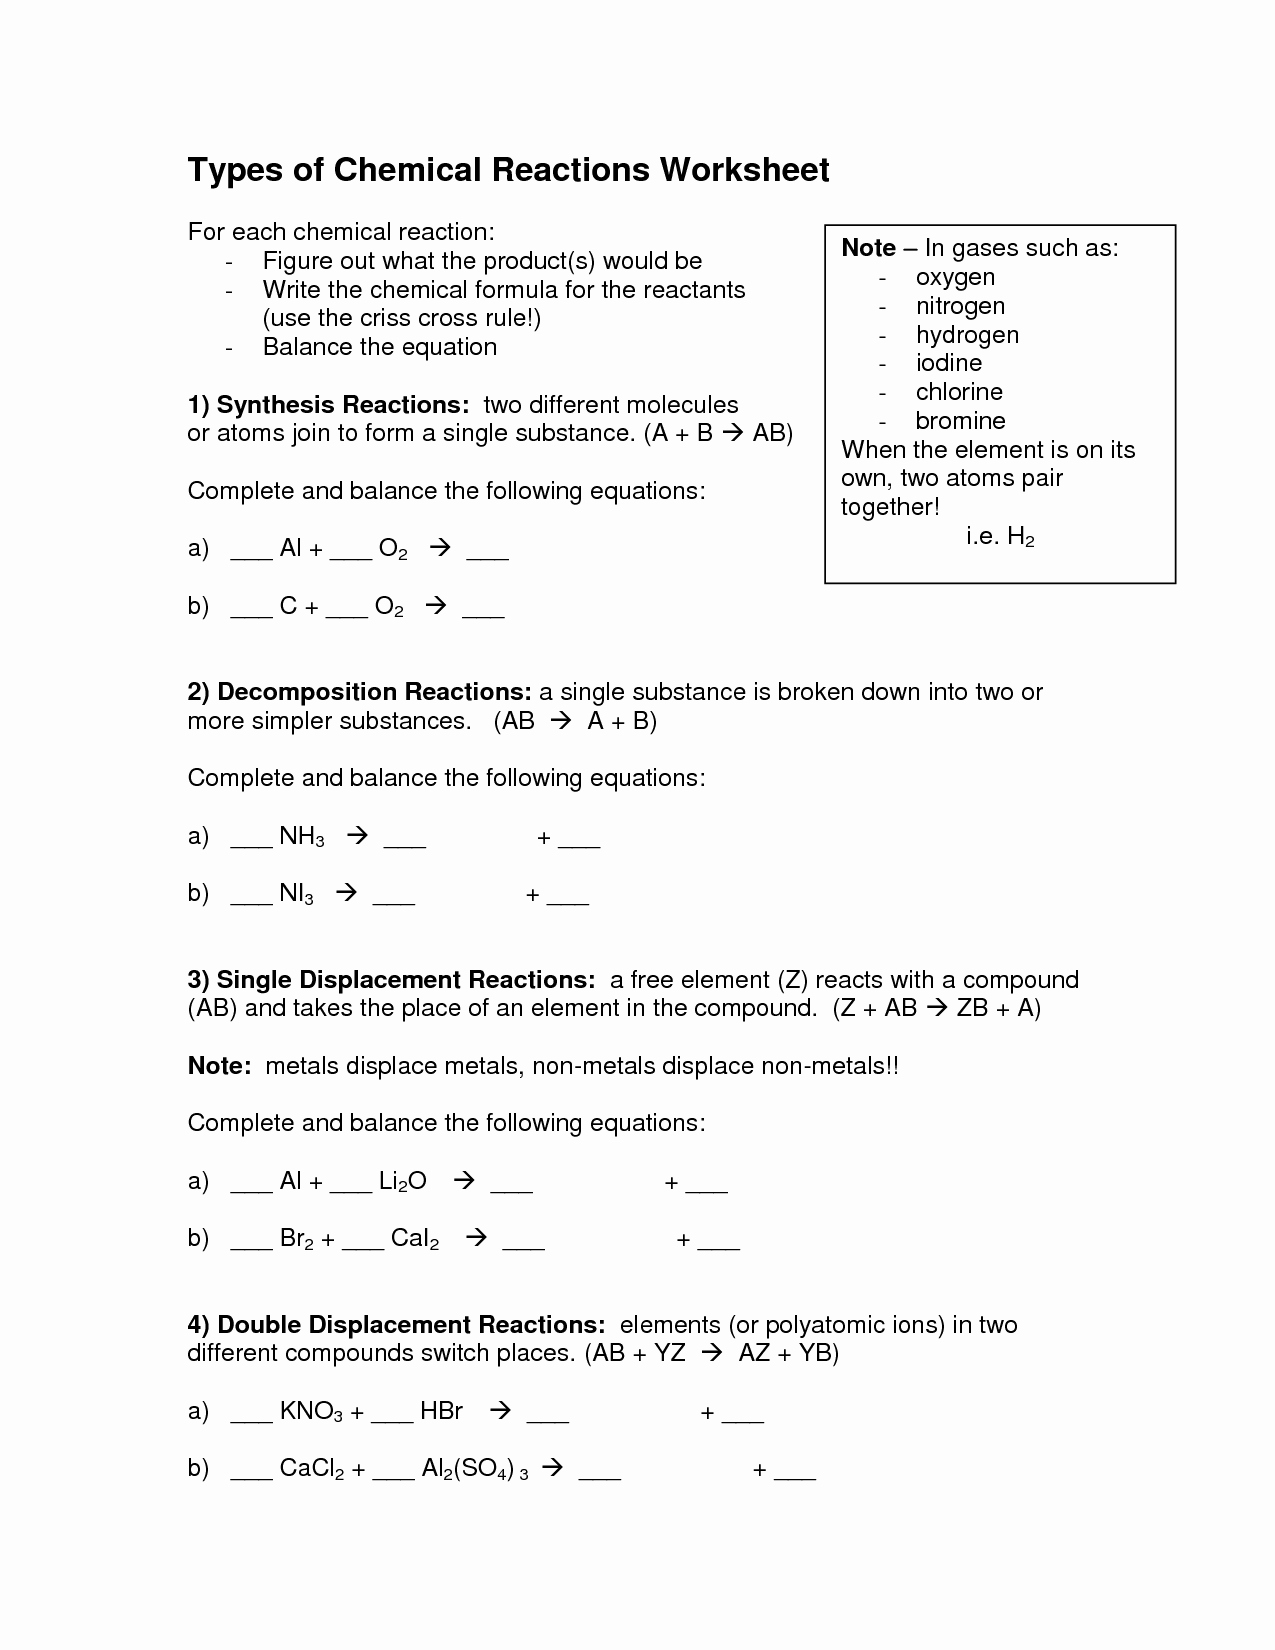 Chemical Reactions Worksheet Answers Fresh 16 Best Of Types Chemical Reactions Worksheets